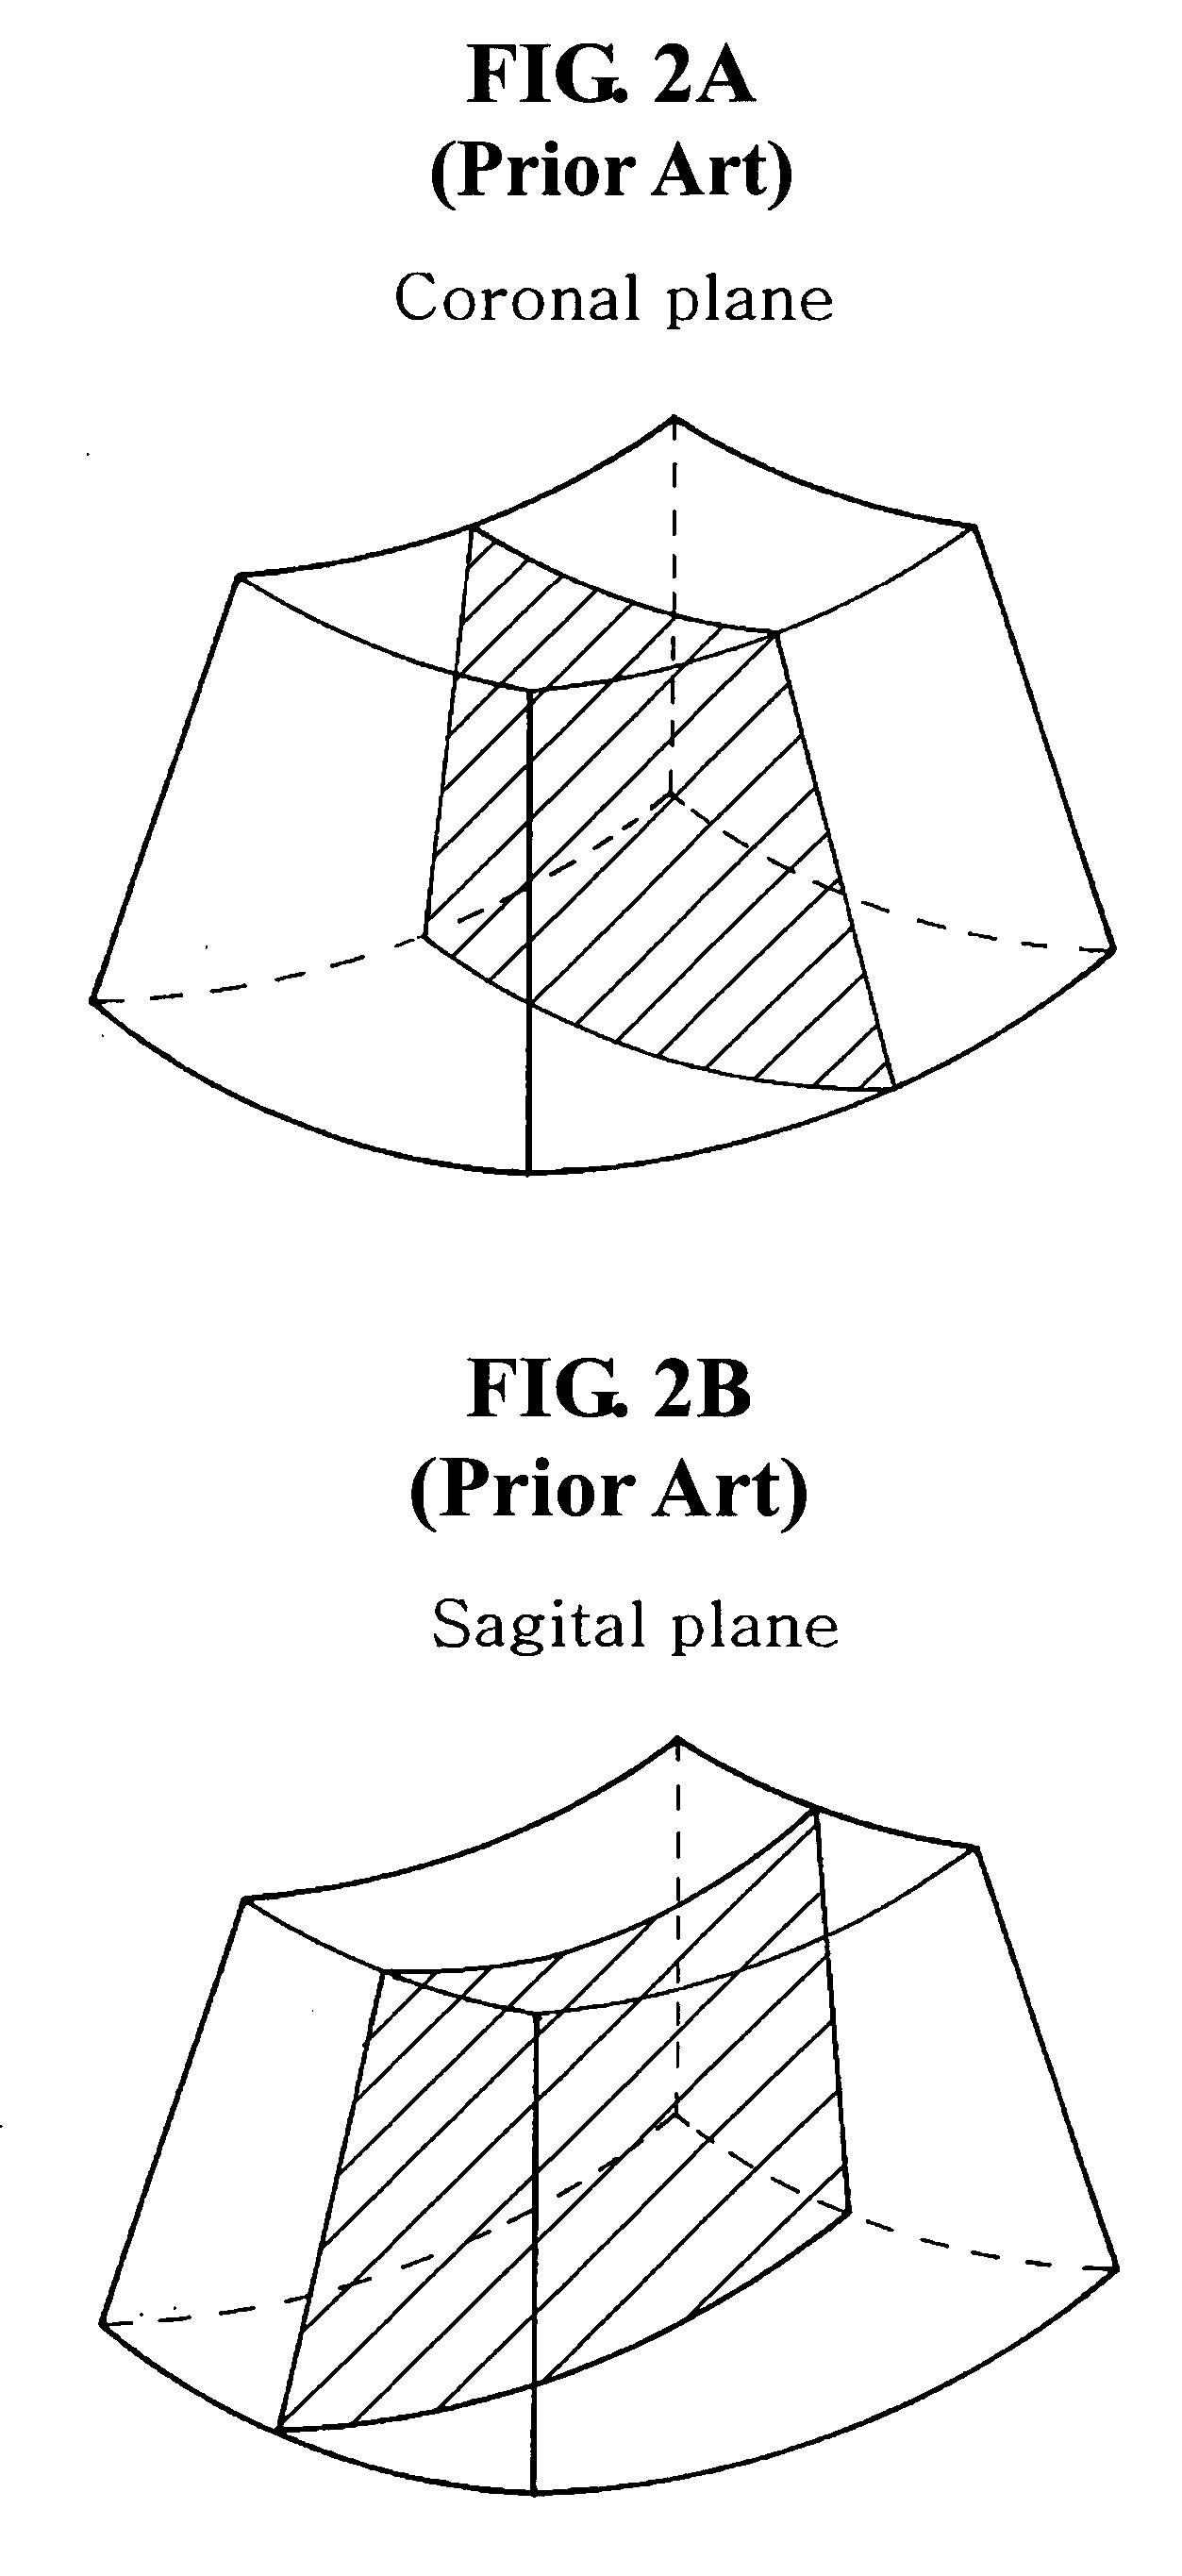 Apparatus and method for enhancing quality of sectional plane image in 3 dimensional ultrasound data